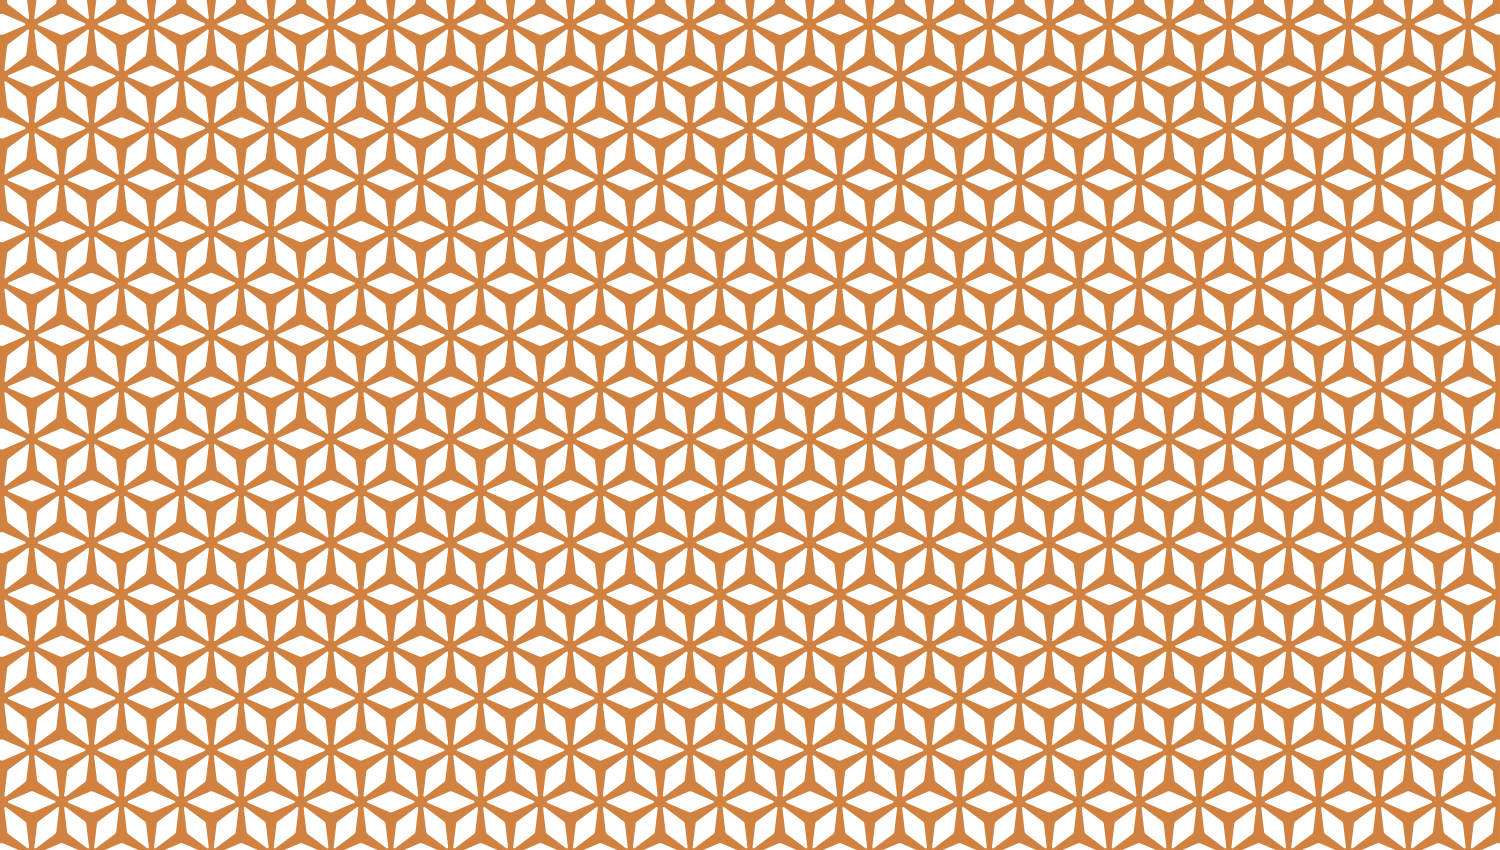 Parasoleil™ Tesseract© pattern displayed with a ochre color overlay